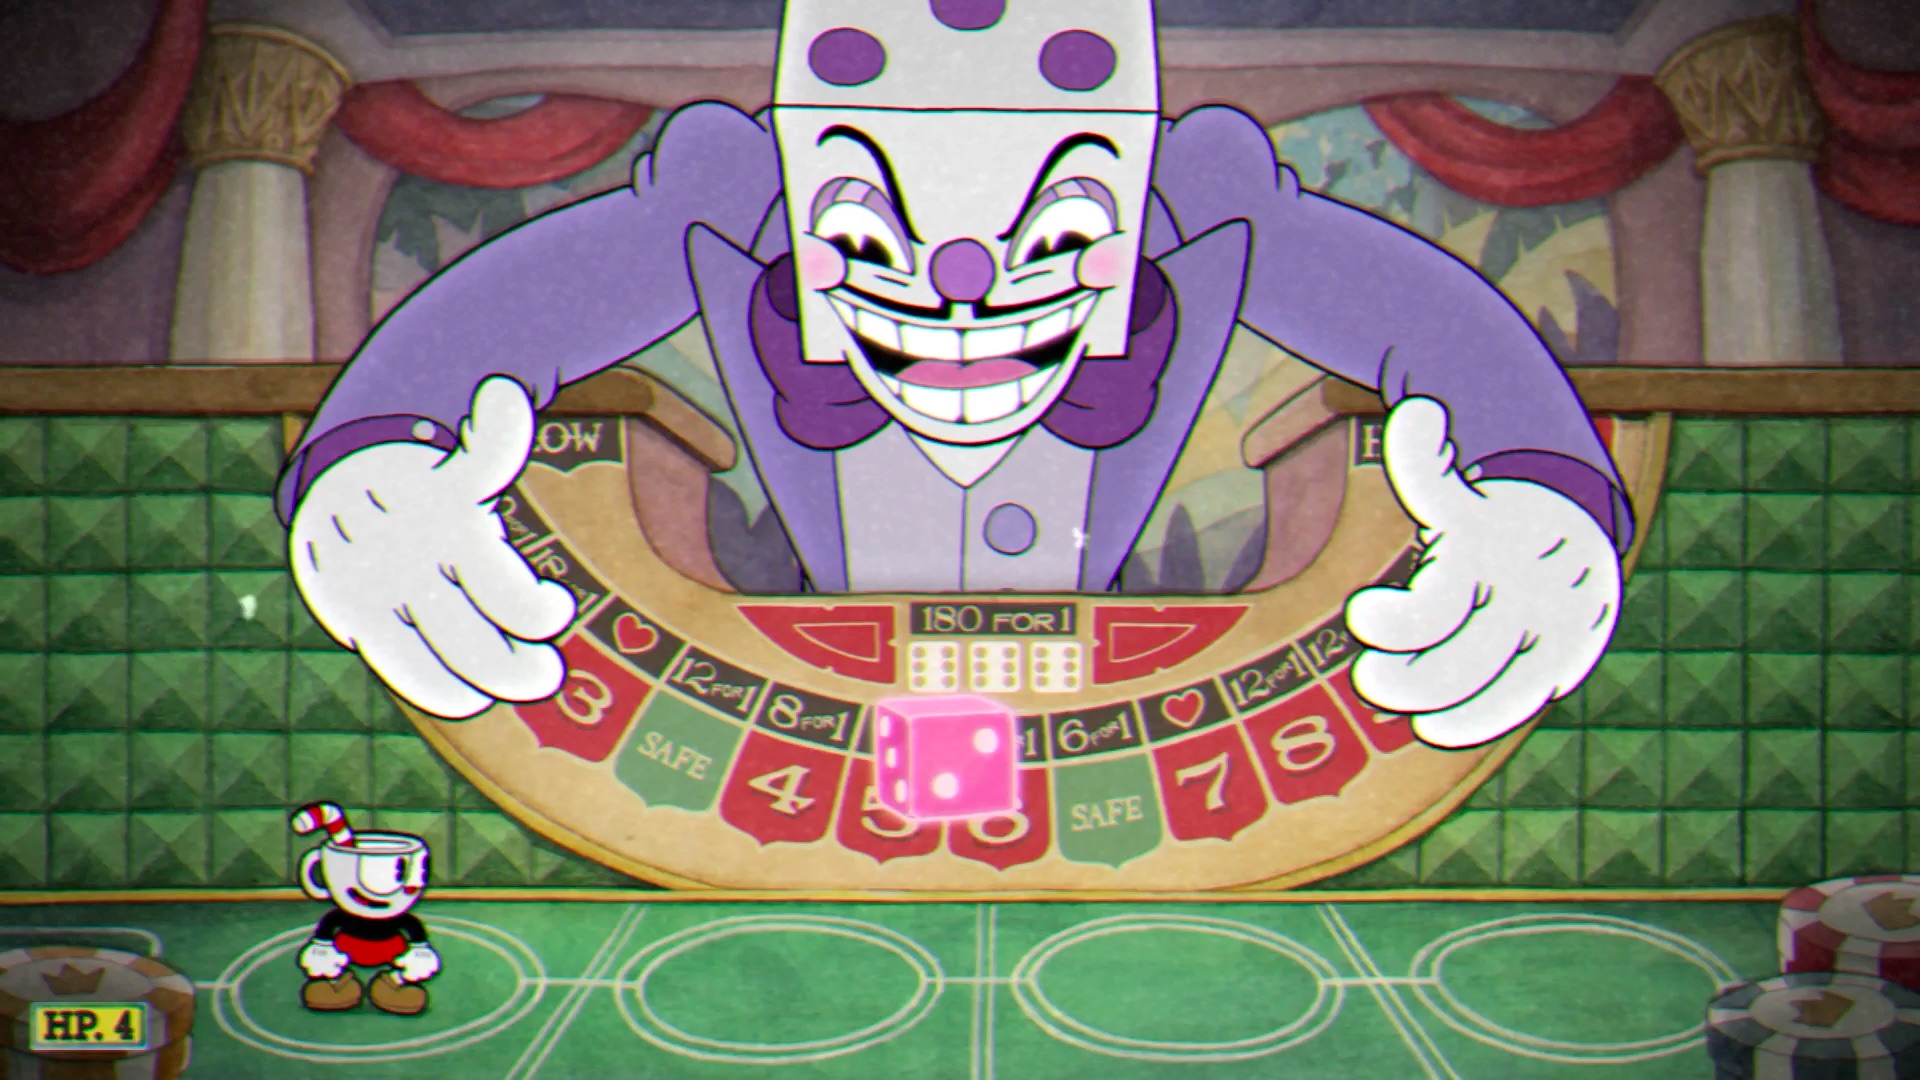 The Cuphead Show Receives New Sneak Peek Featuring King Dice